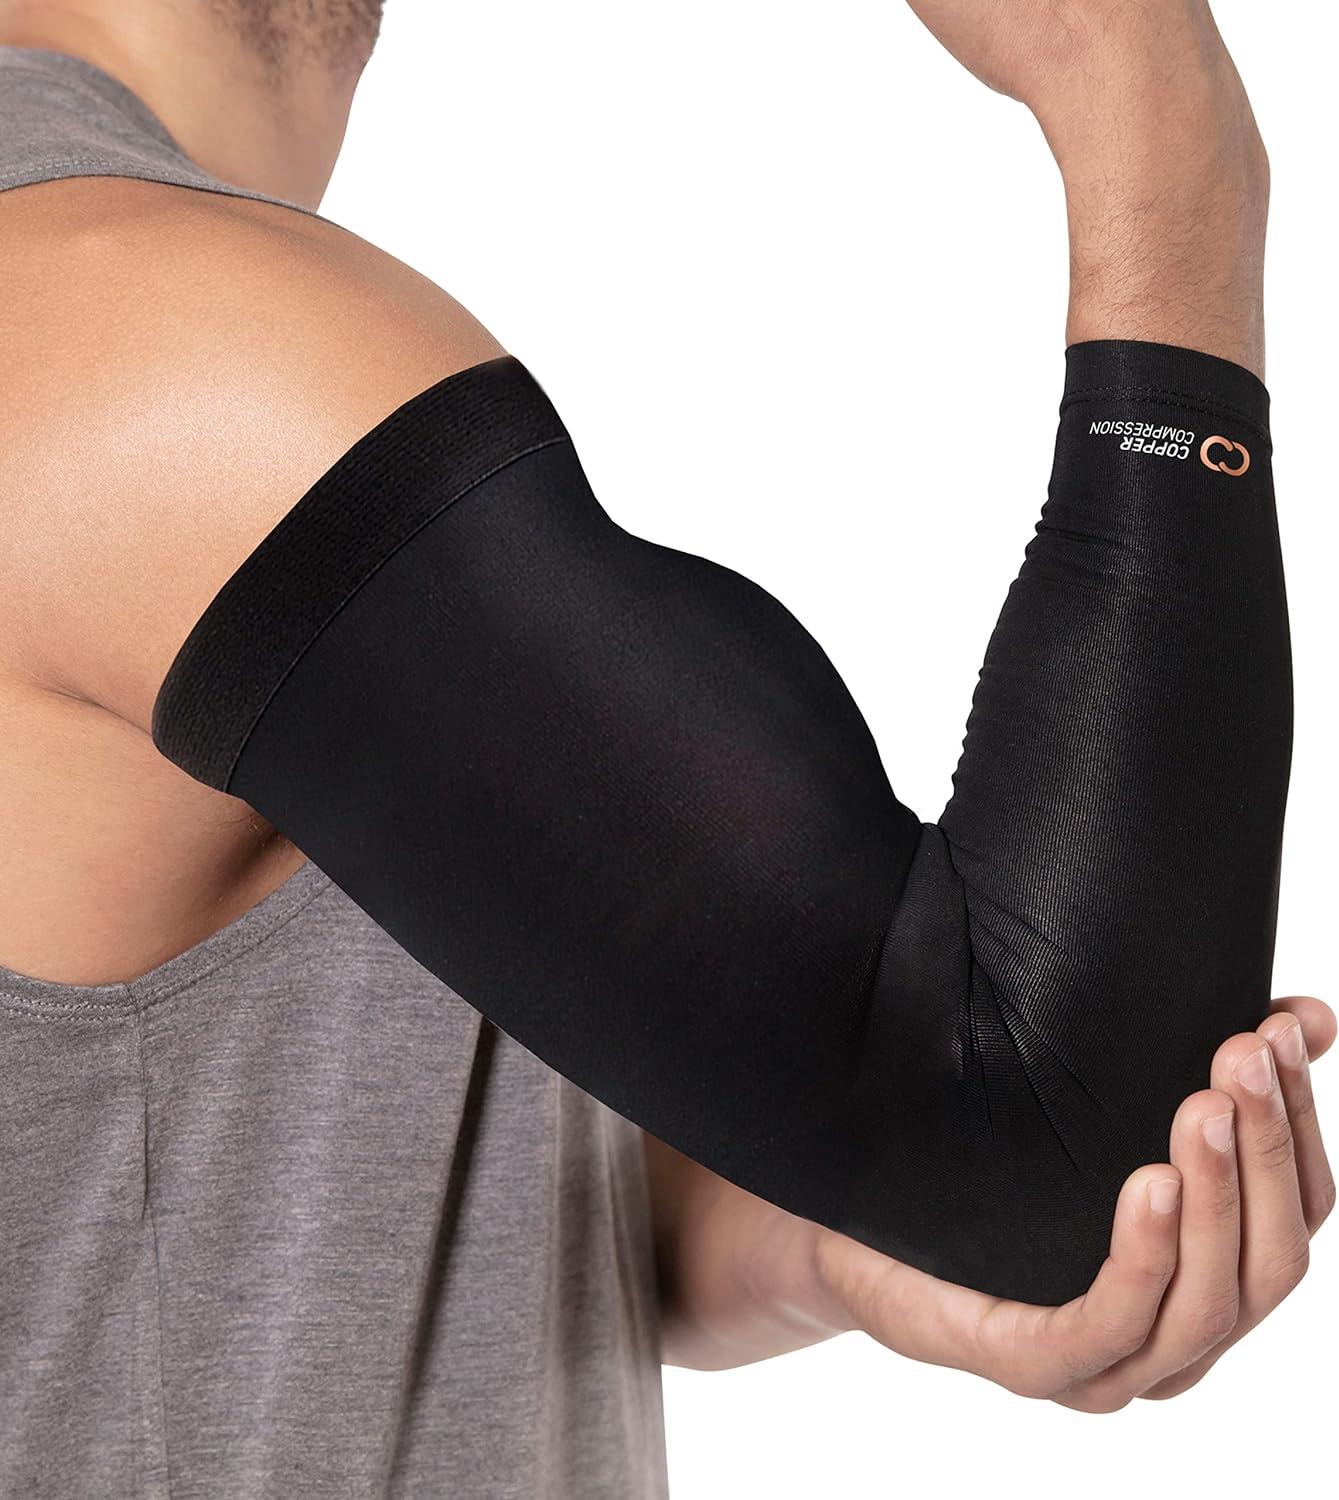 Copper Compression Arm Brace - Copper Infused Sleeve for Arms Forearm  Bicep. Tennis Elbow Basketball Golf Arthritis Tendonitis Bursitis  Osteoporosis Rehab Post Surgery Physical Therapy. (M) Medium (Pack of 1)